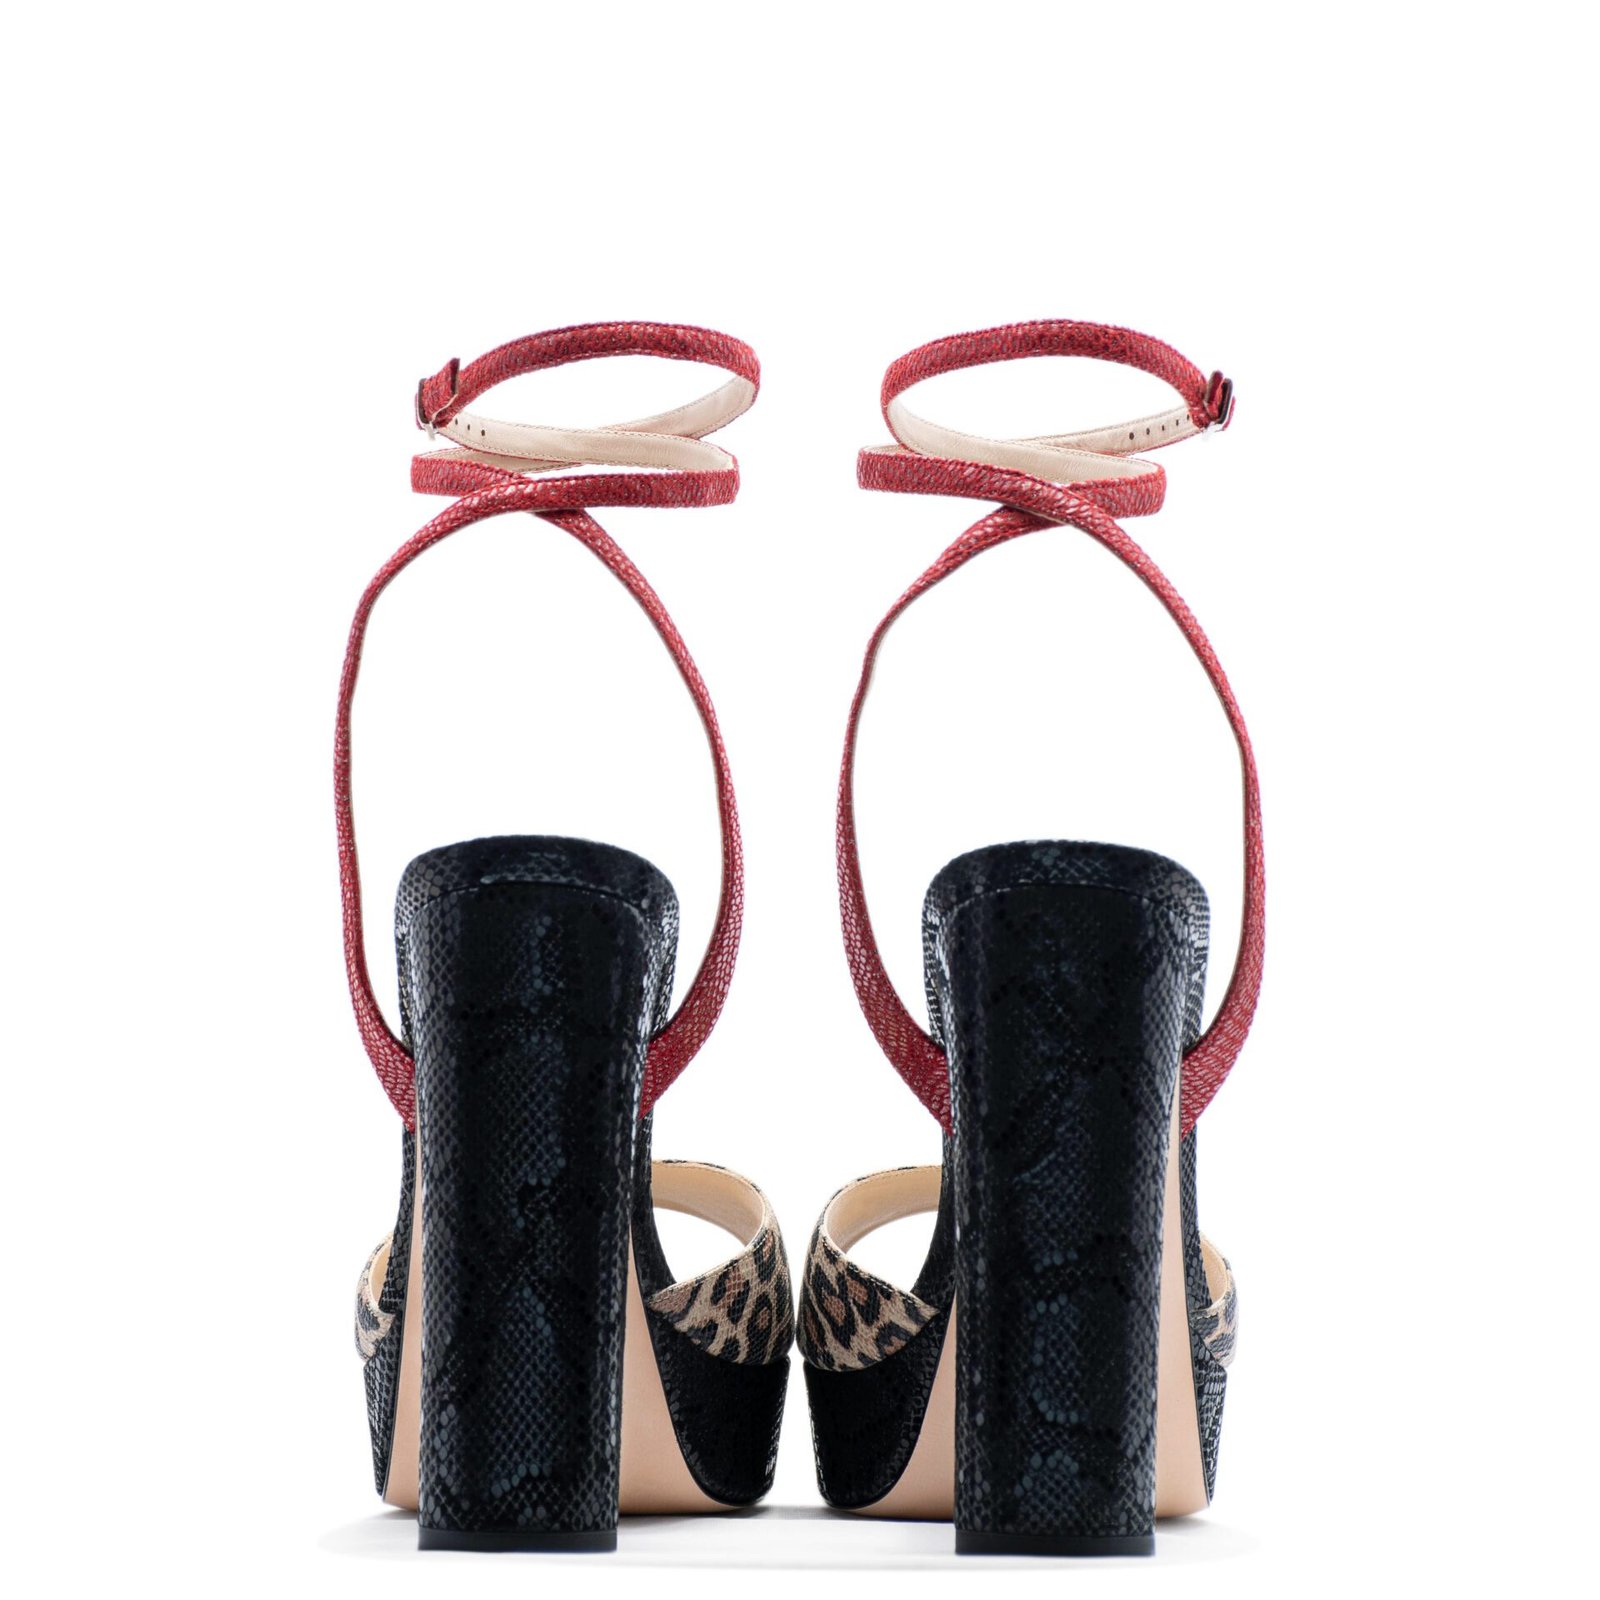 Black, red and animal print sandal heels for men and women